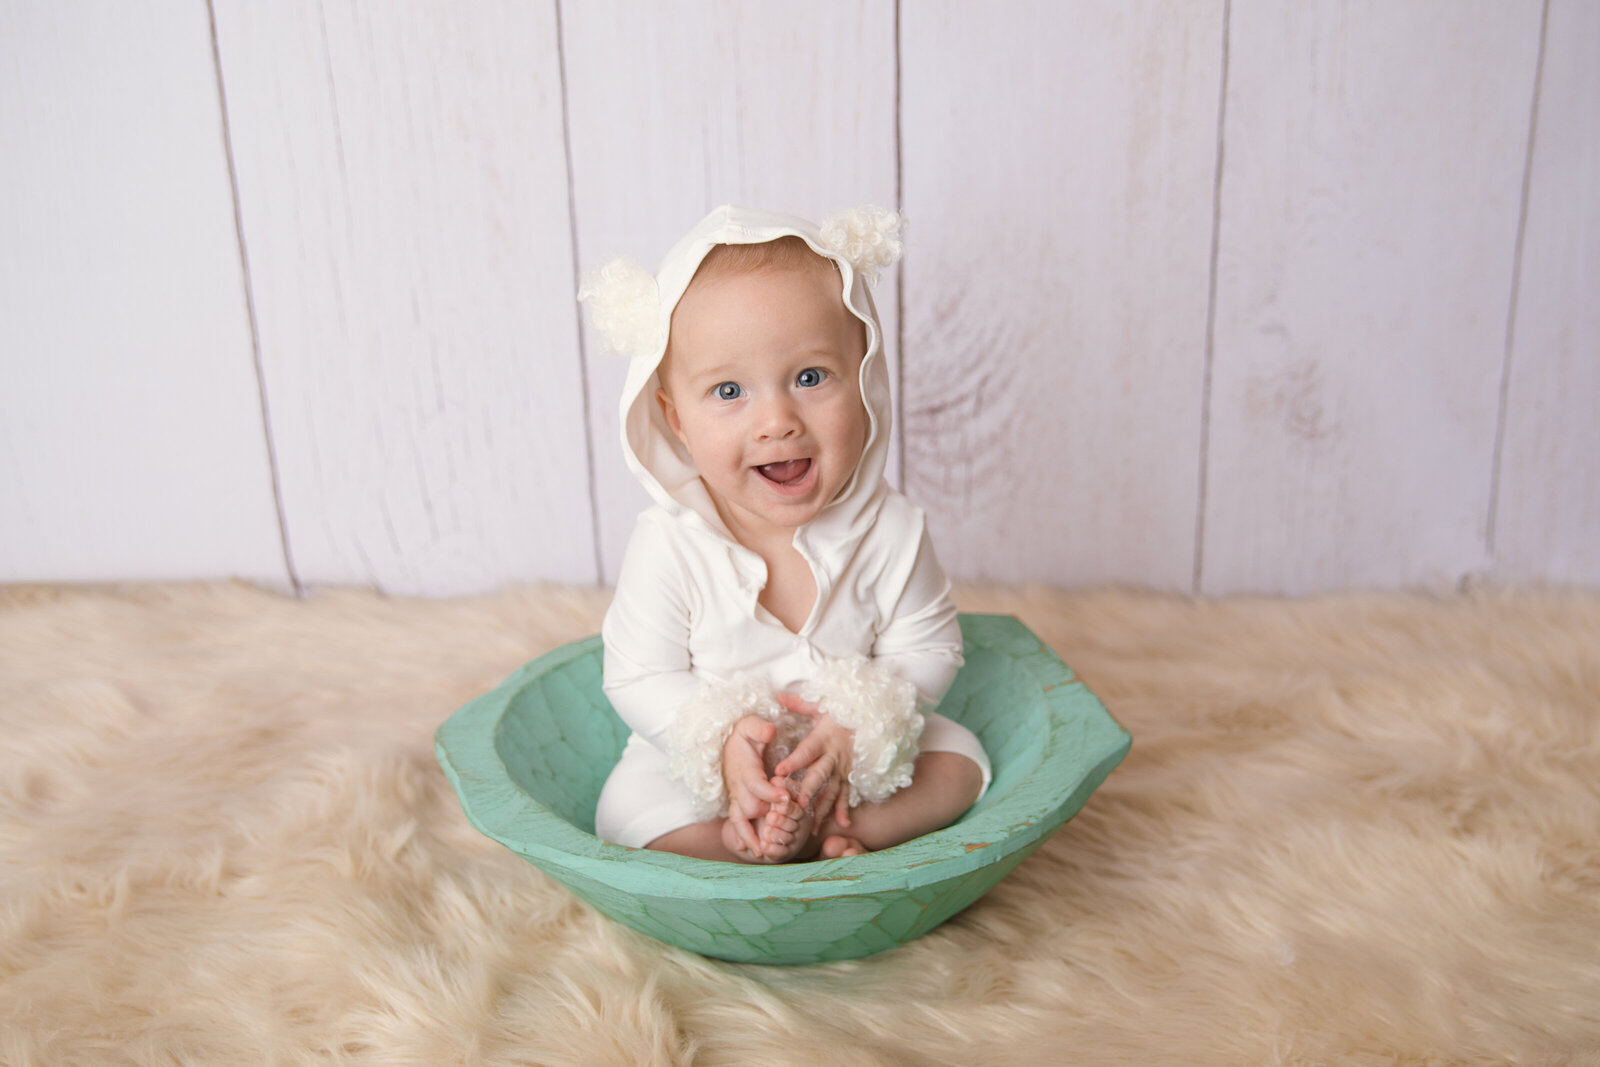 Milestone Photographer, a happy baby smiles while sitting in a wooden bowl